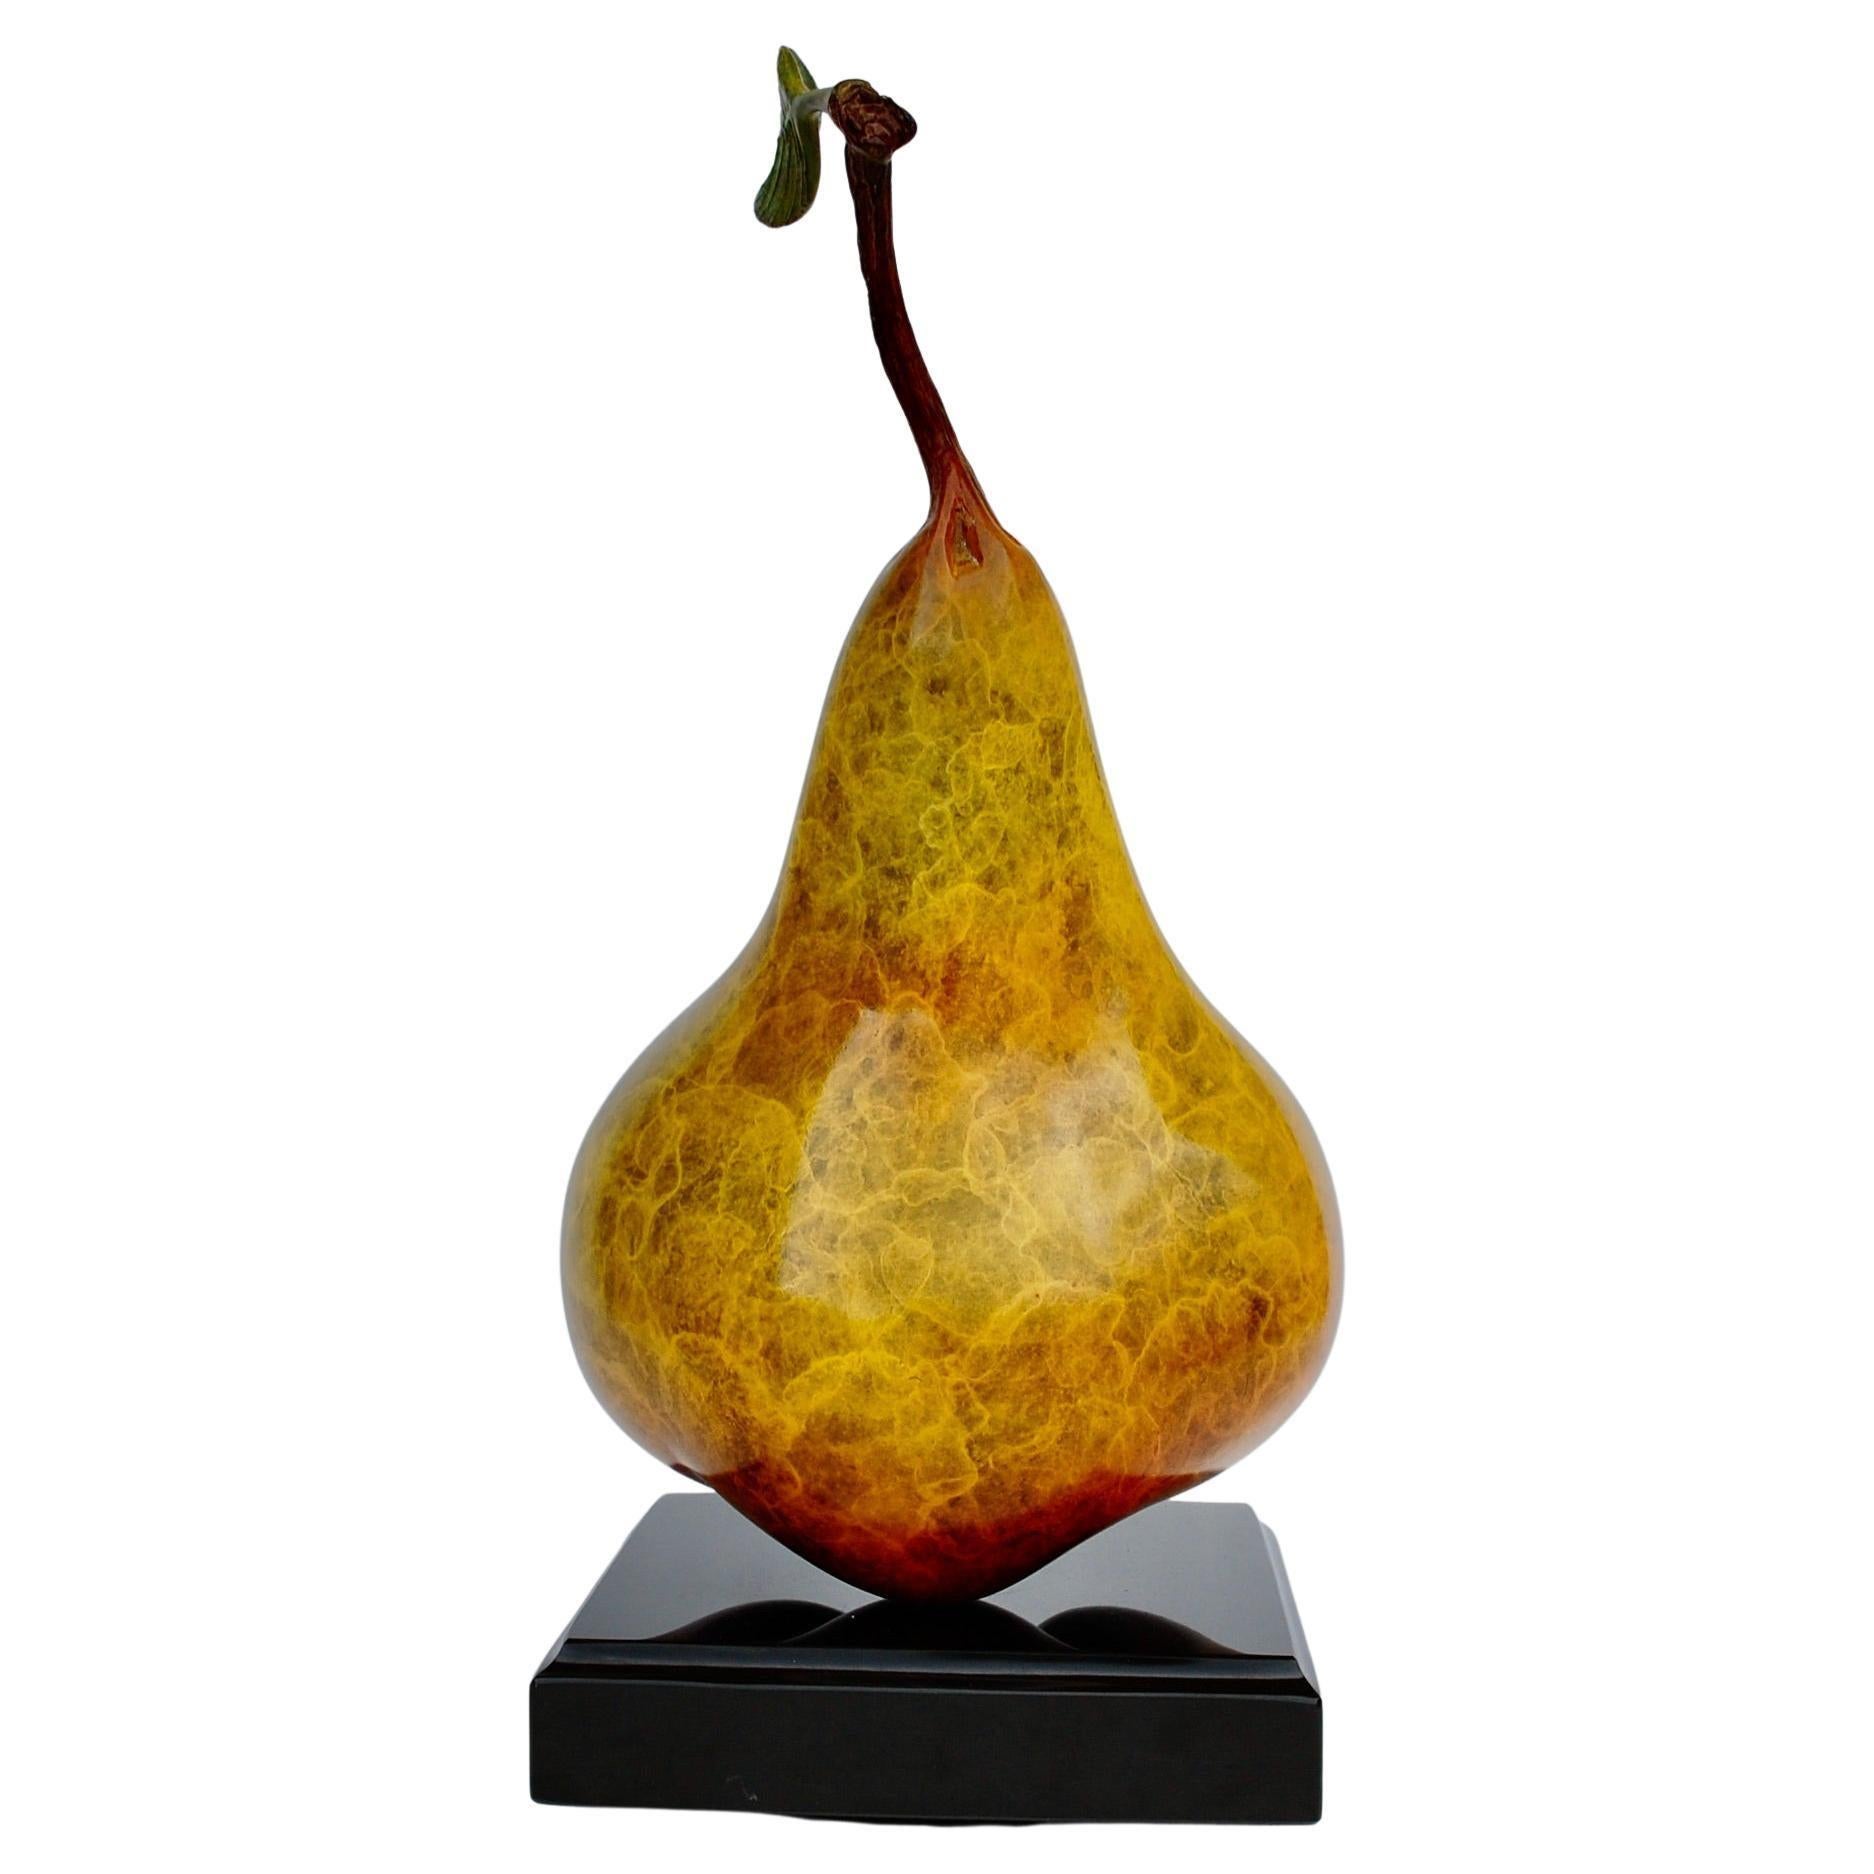 Pear with a leaf.
Artist signed, patinated bronze black marble base 8